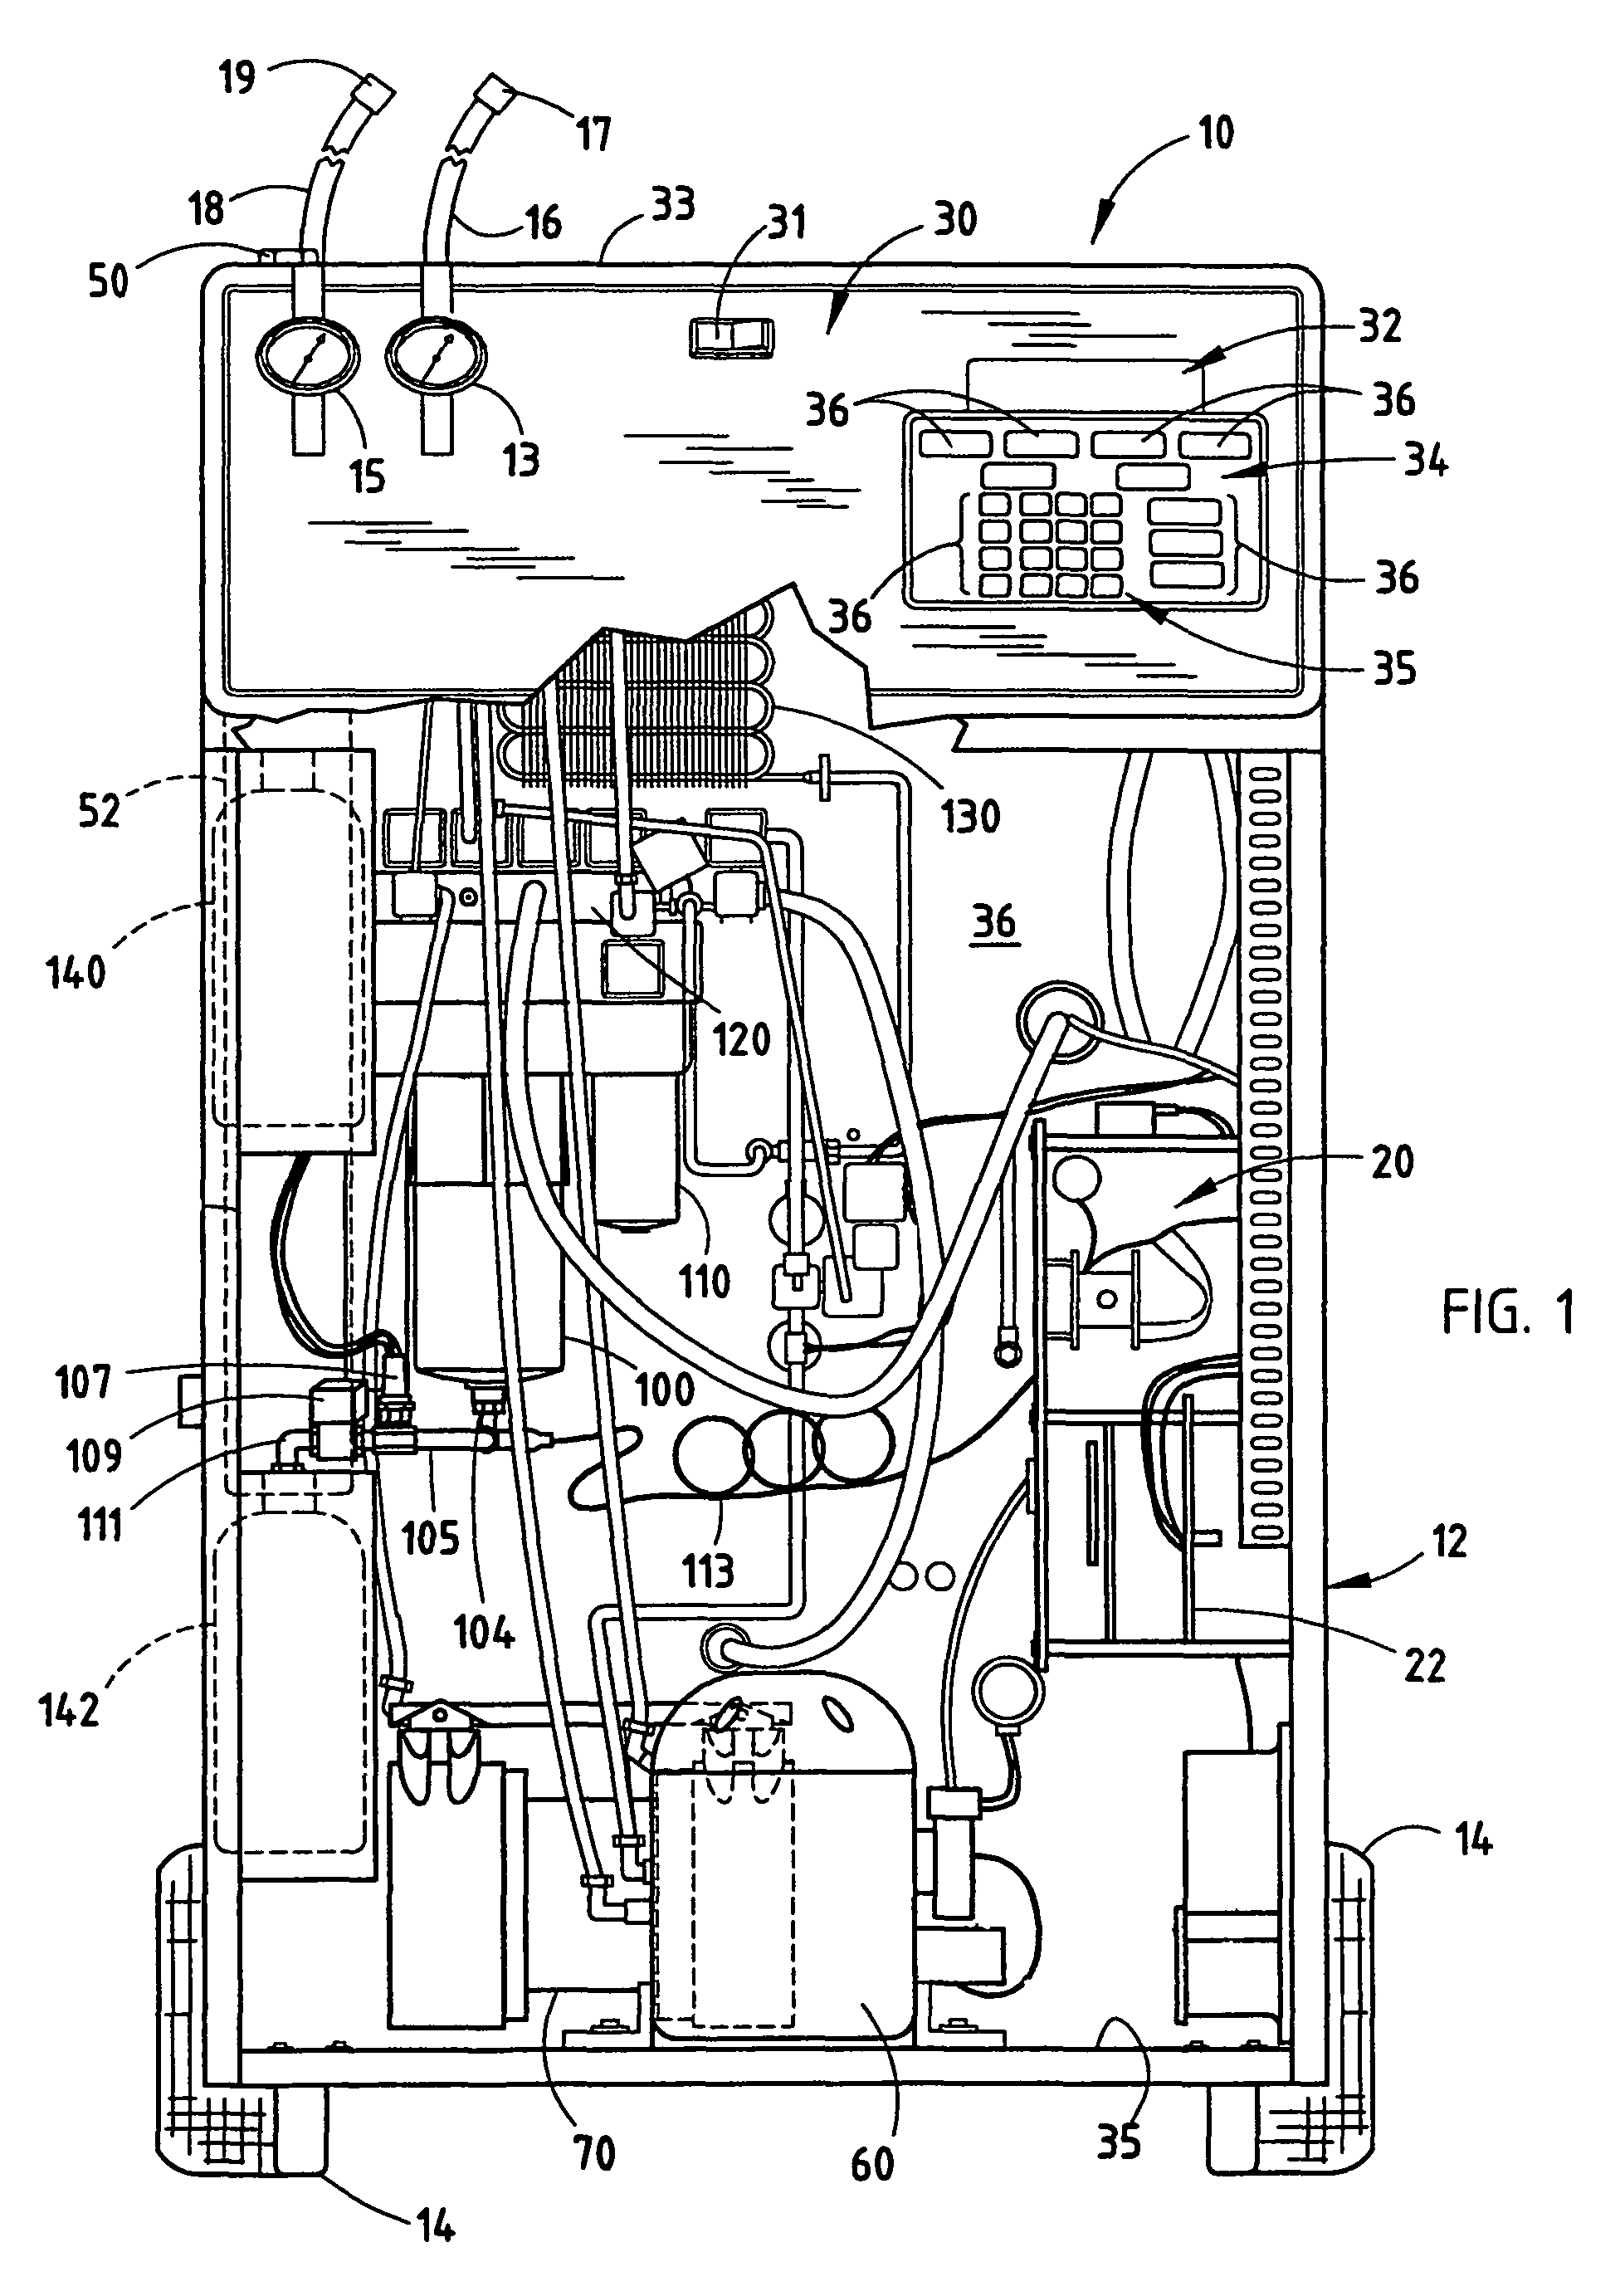 Internal clearing function for a refrigerant recovery/recharge machine